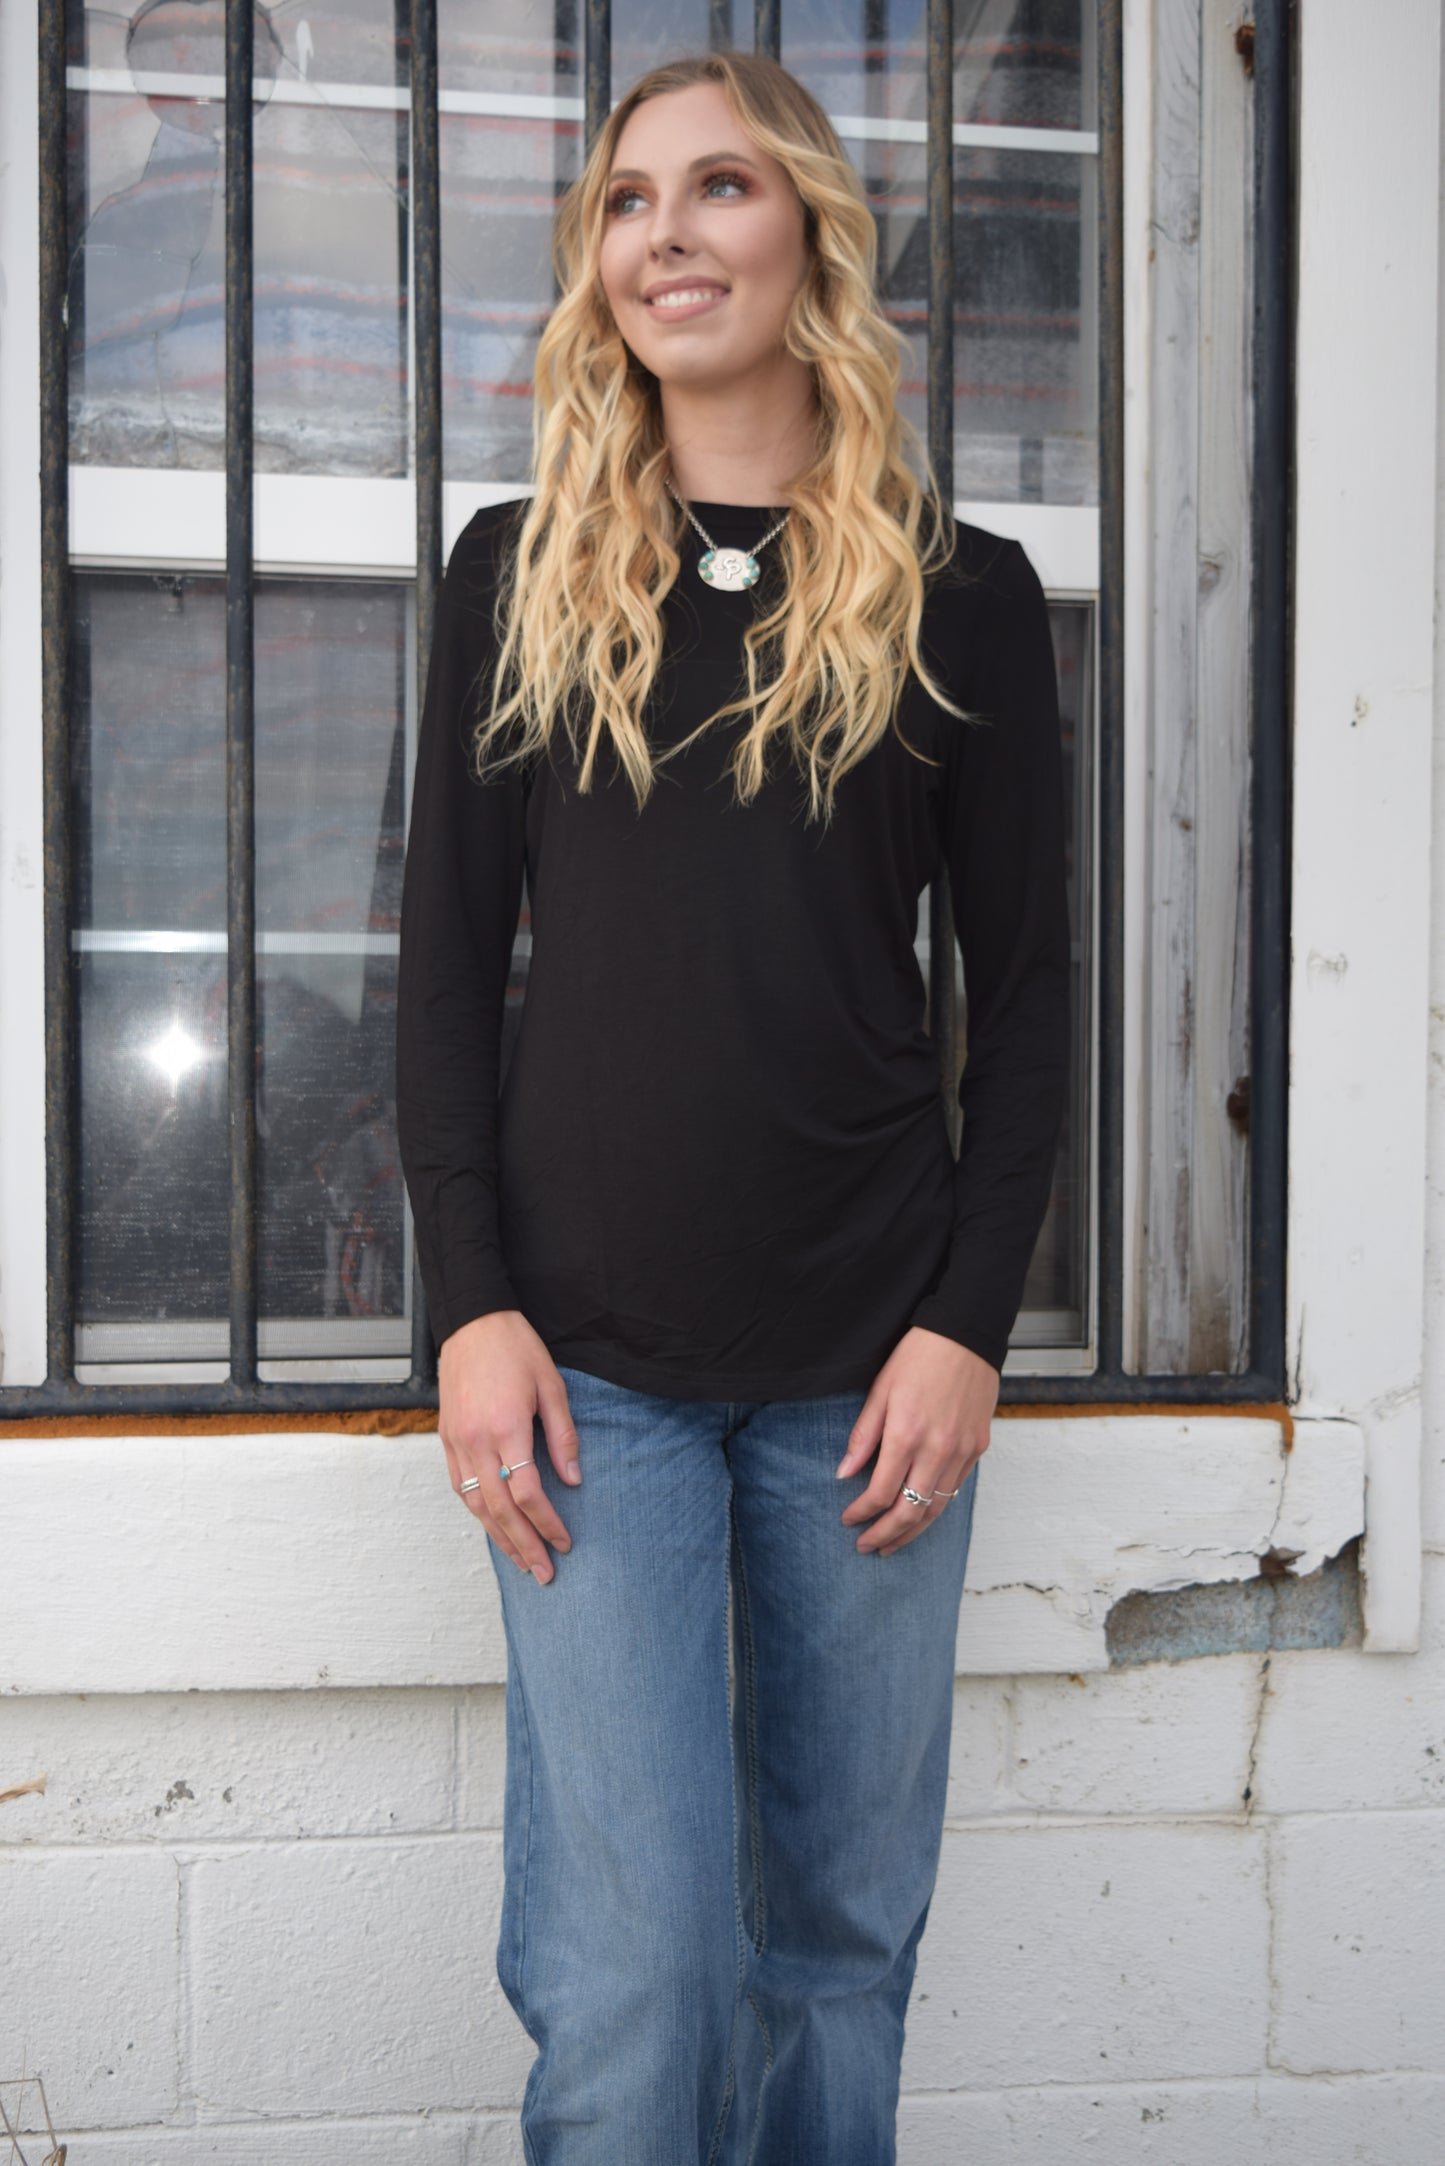 The Pinedale Basic Black Long-Sleeve Top